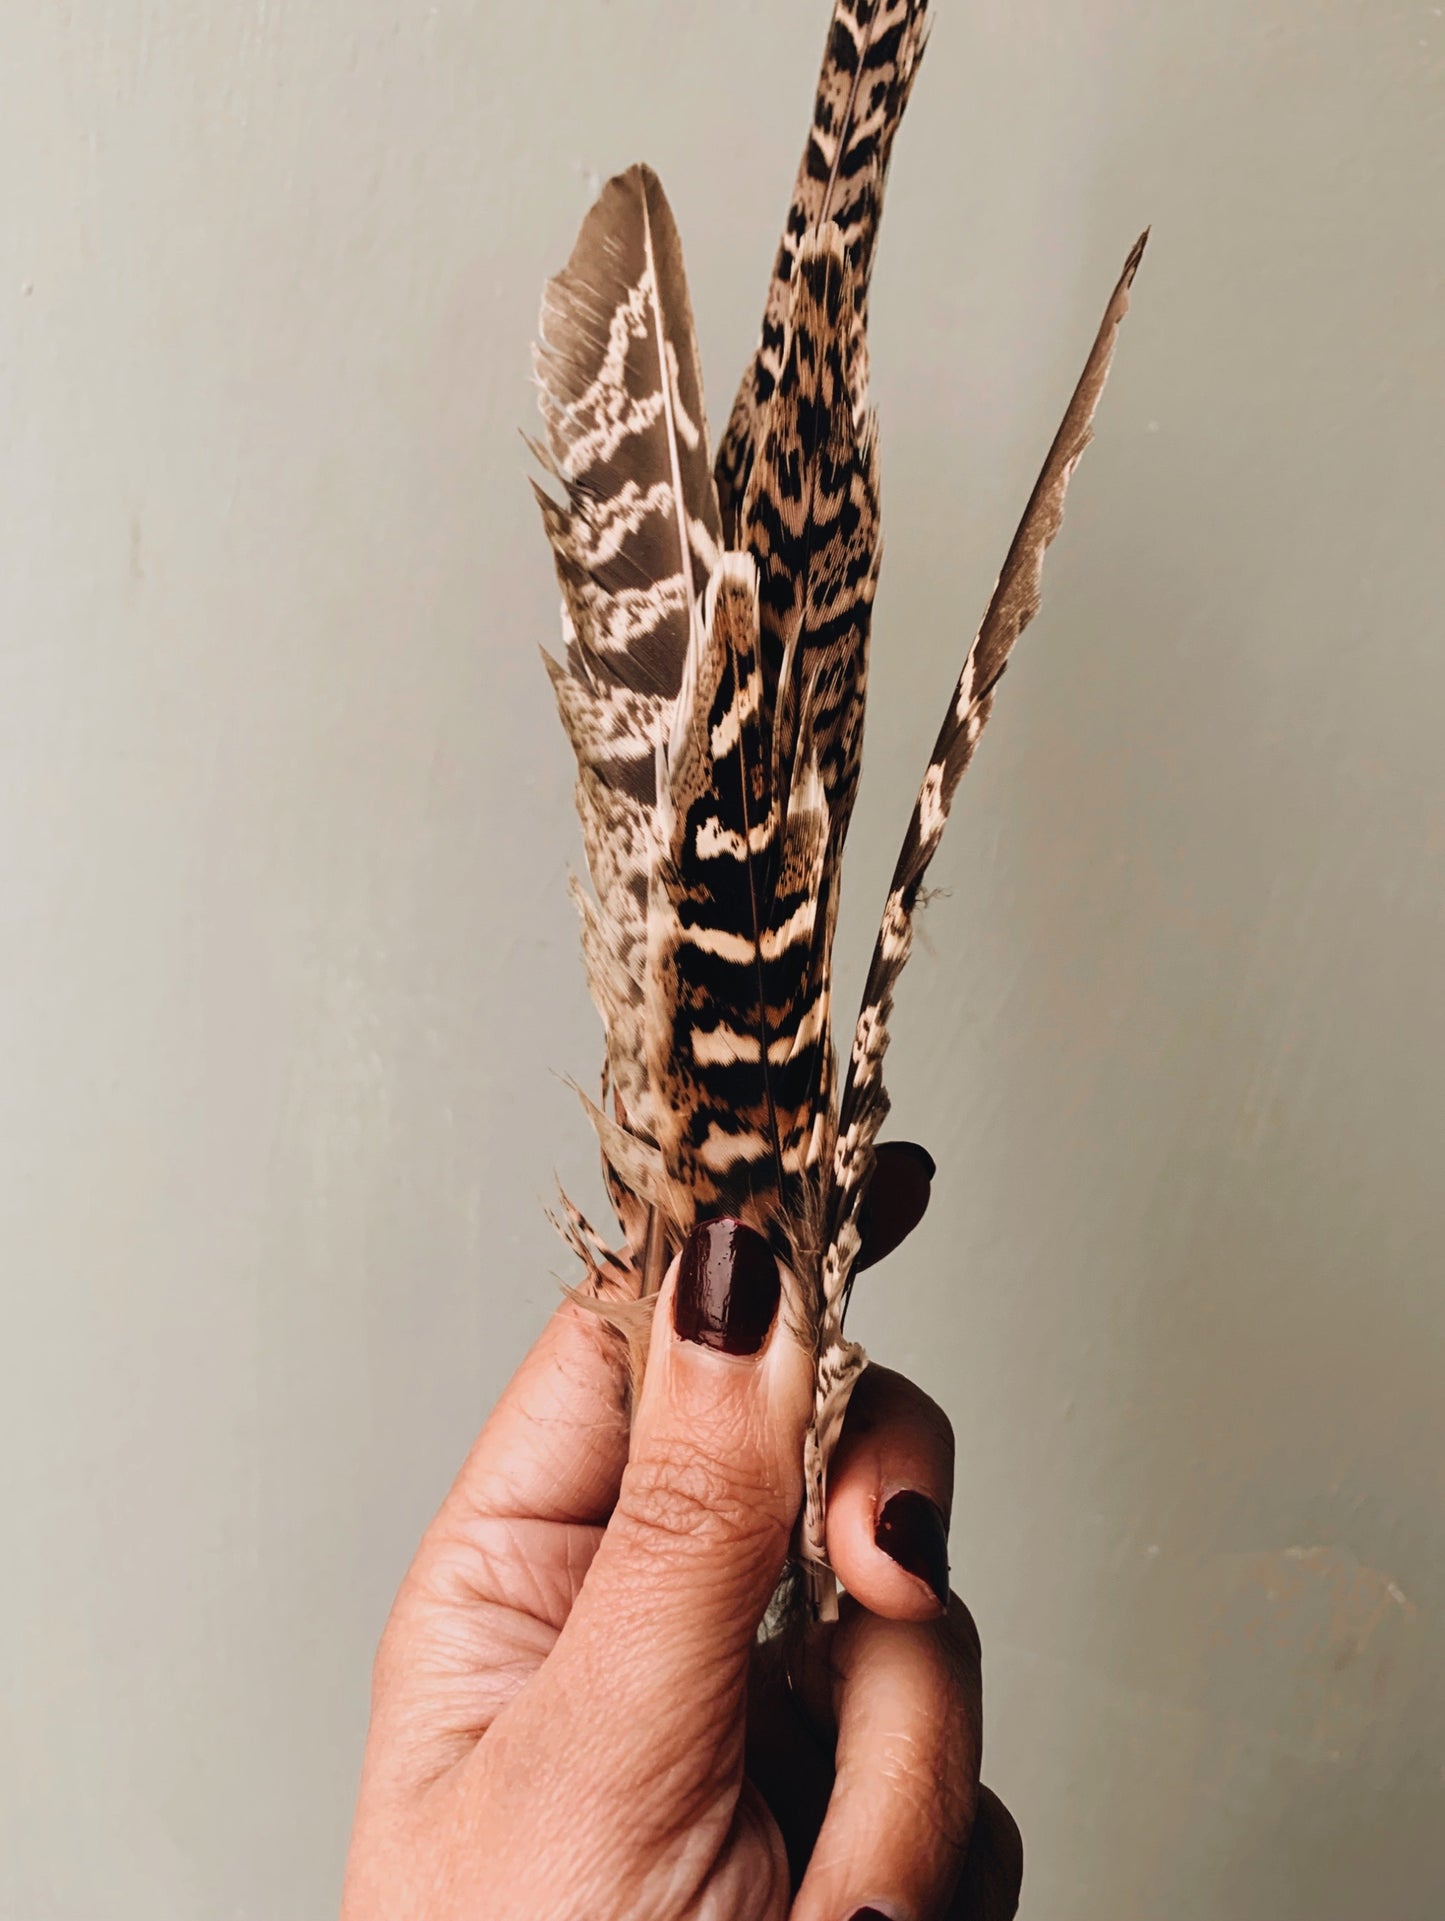 A Pair of Male & Female Pheasant Feathers